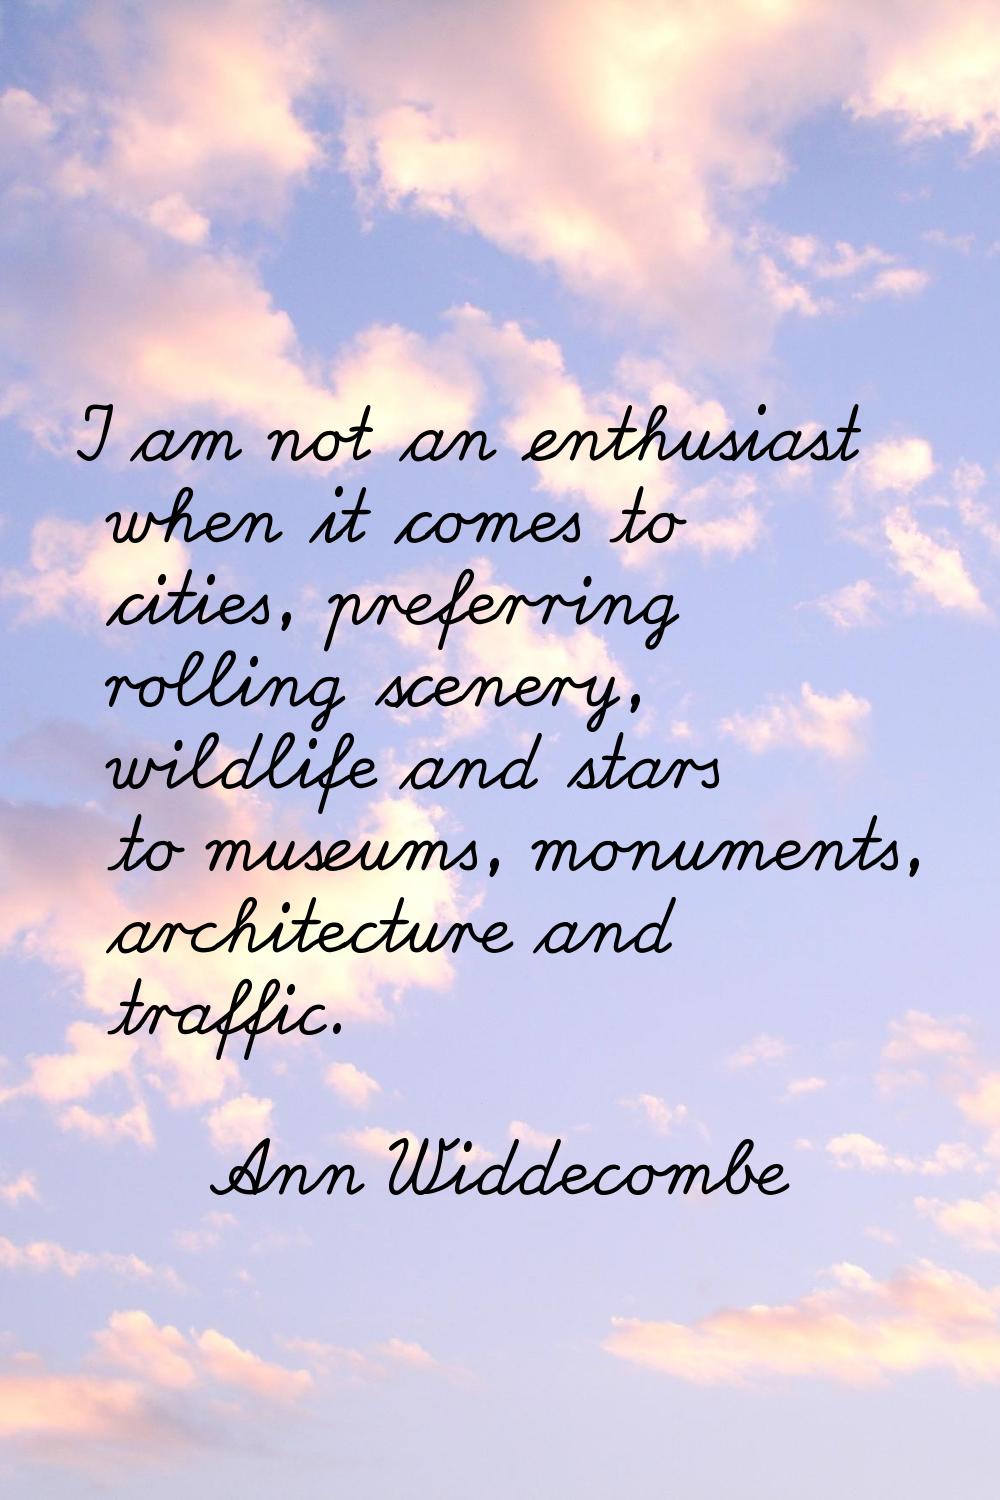 I am not an enthusiast when it comes to cities, preferring rolling scenery, wildlife and stars to m